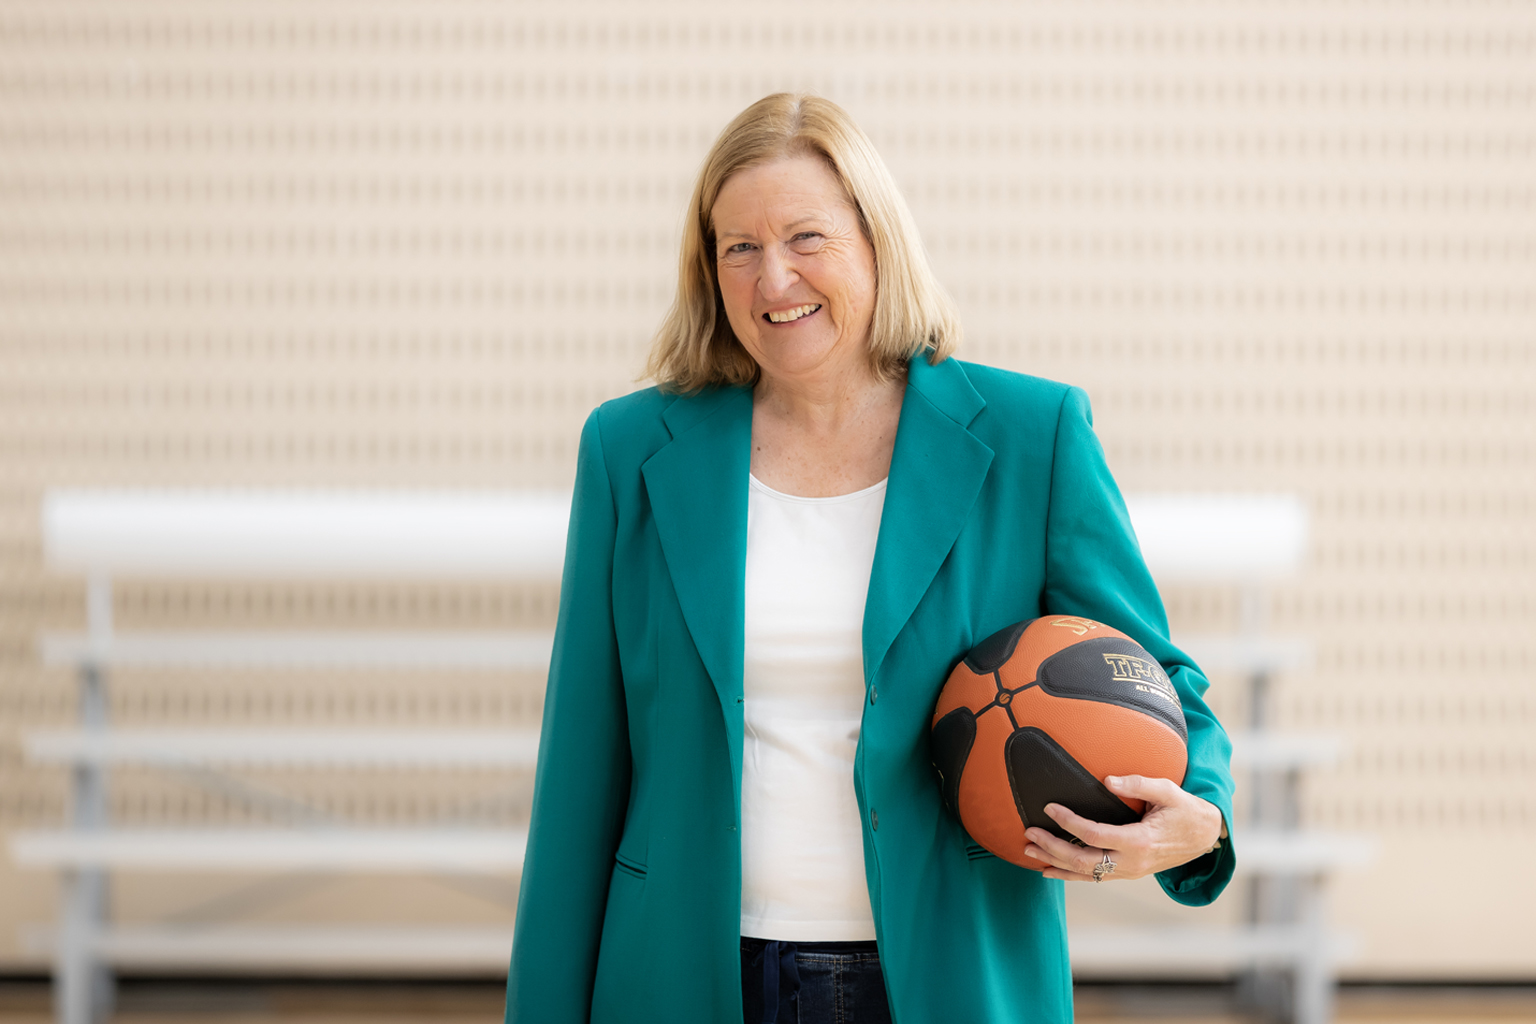 A woman wearing business/professional attire holding a basketball.